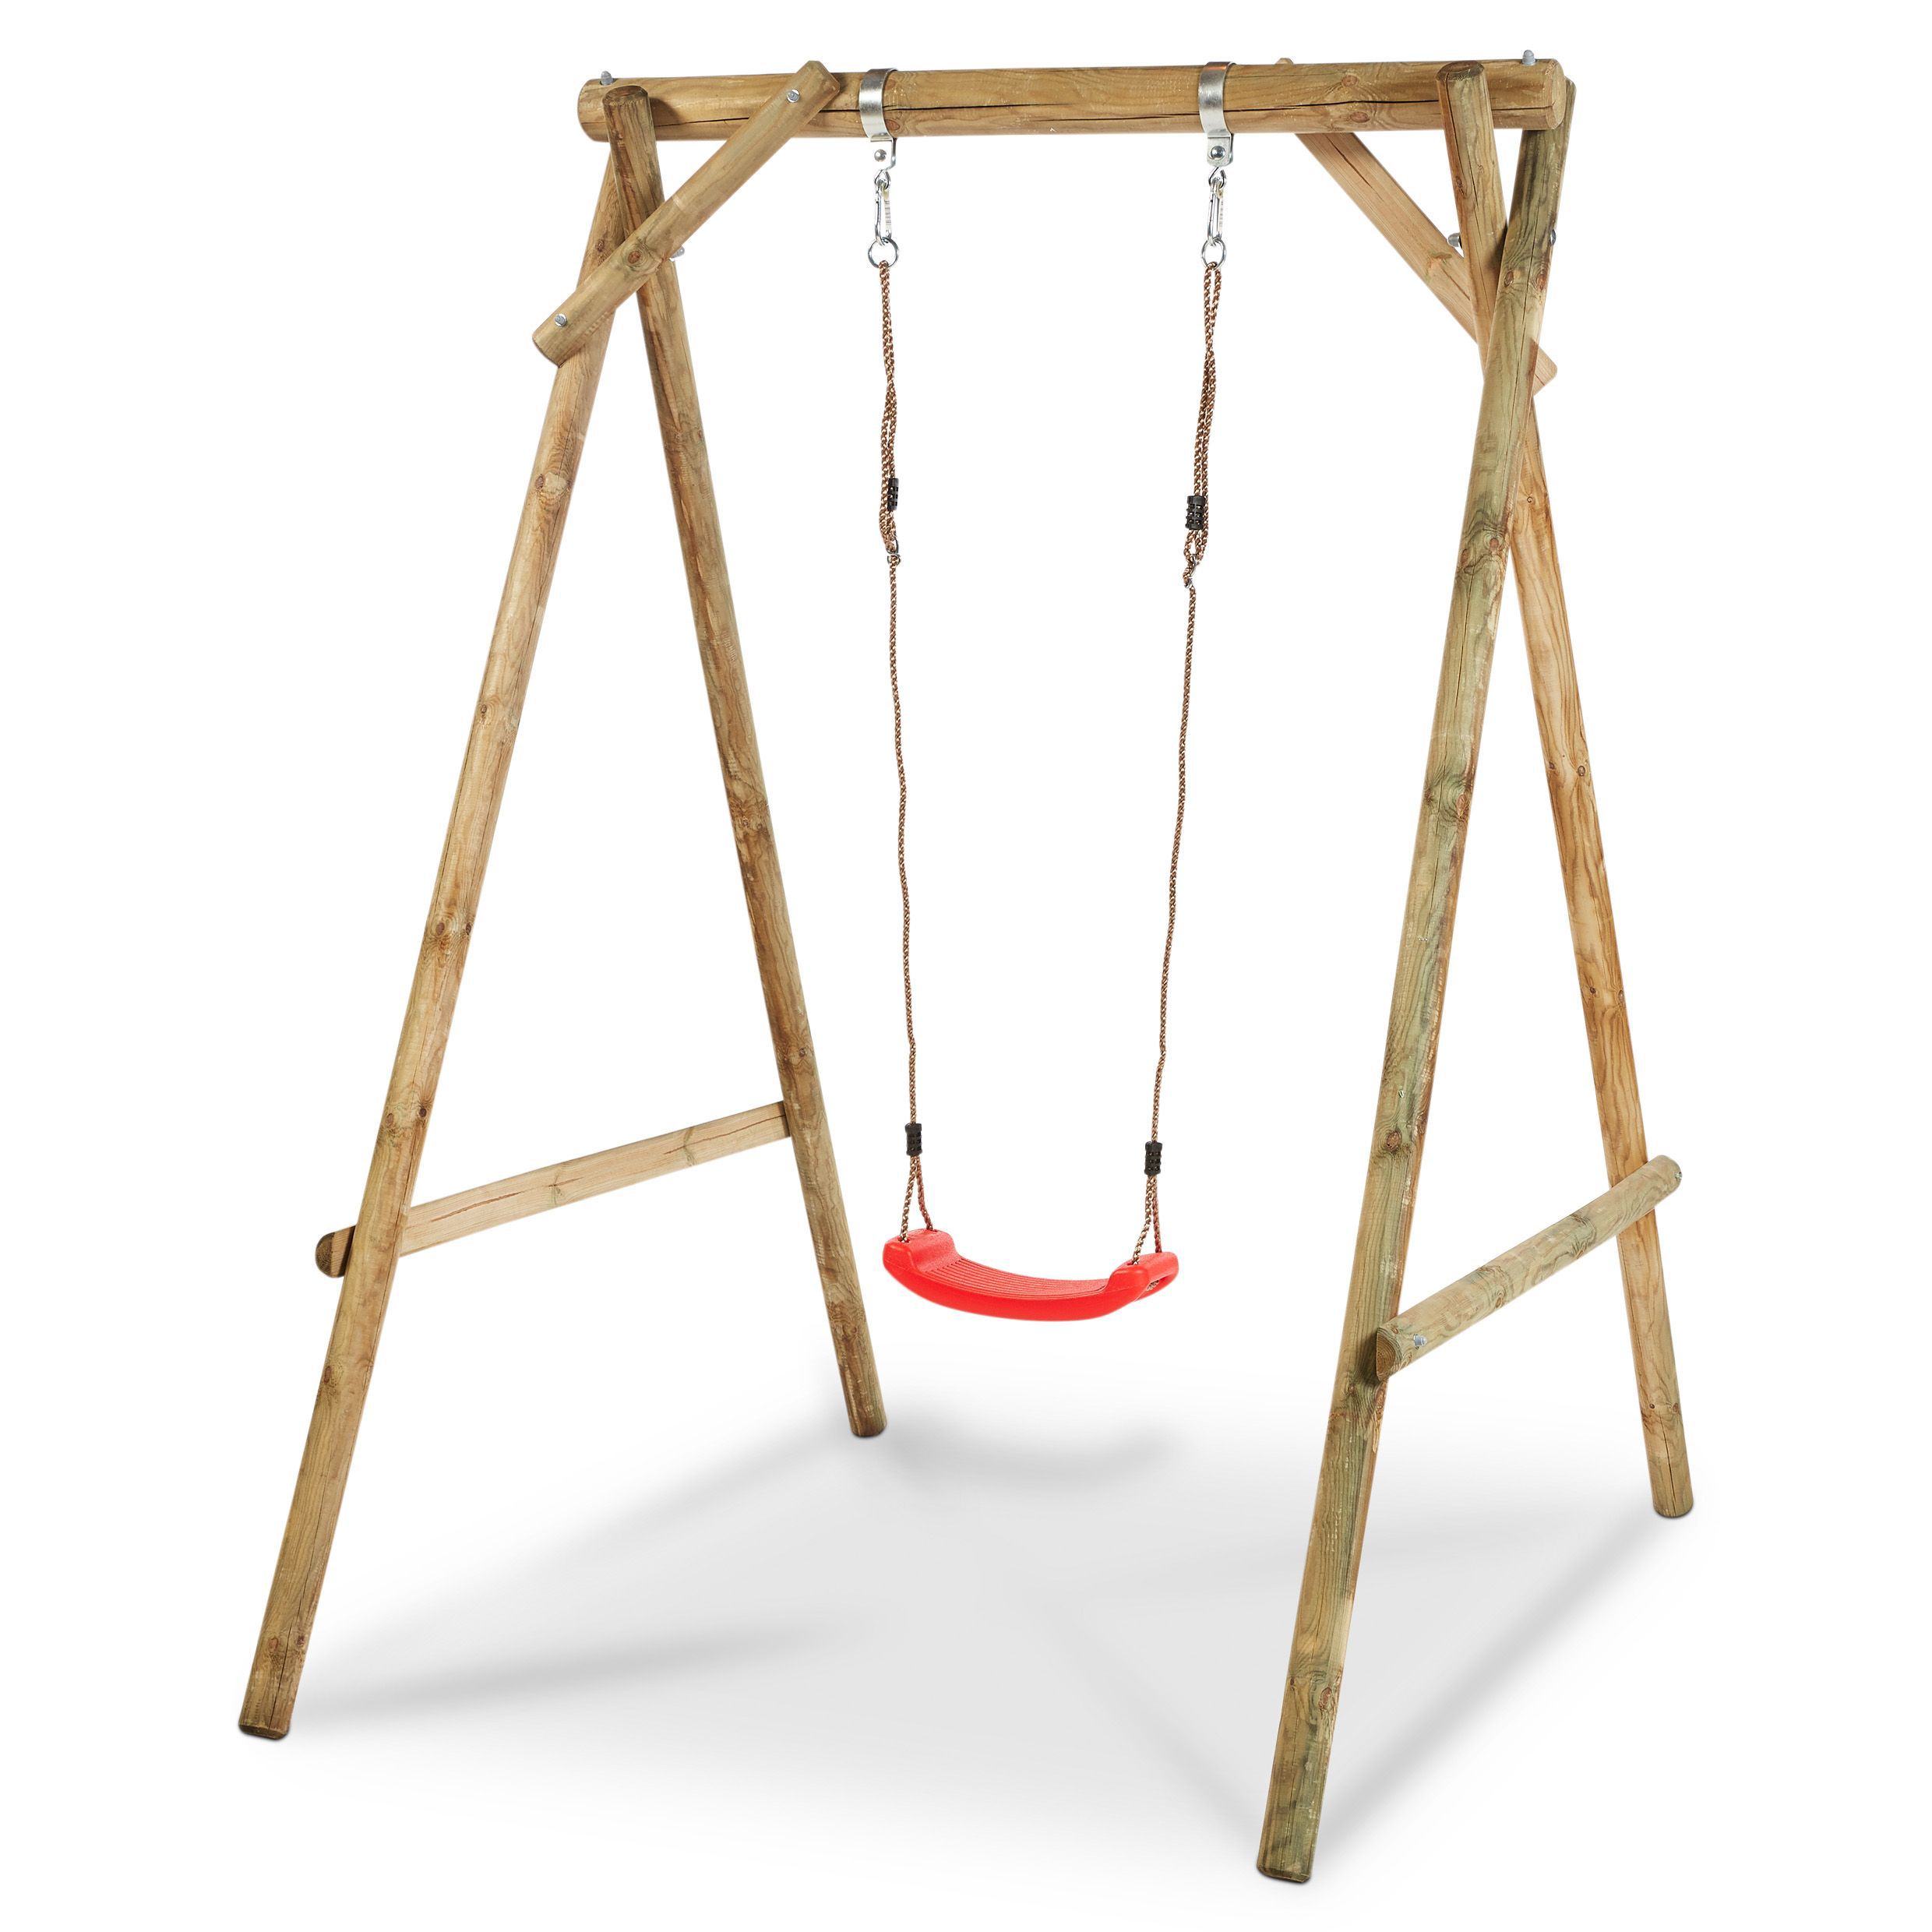 Blooma Wooden Swing set